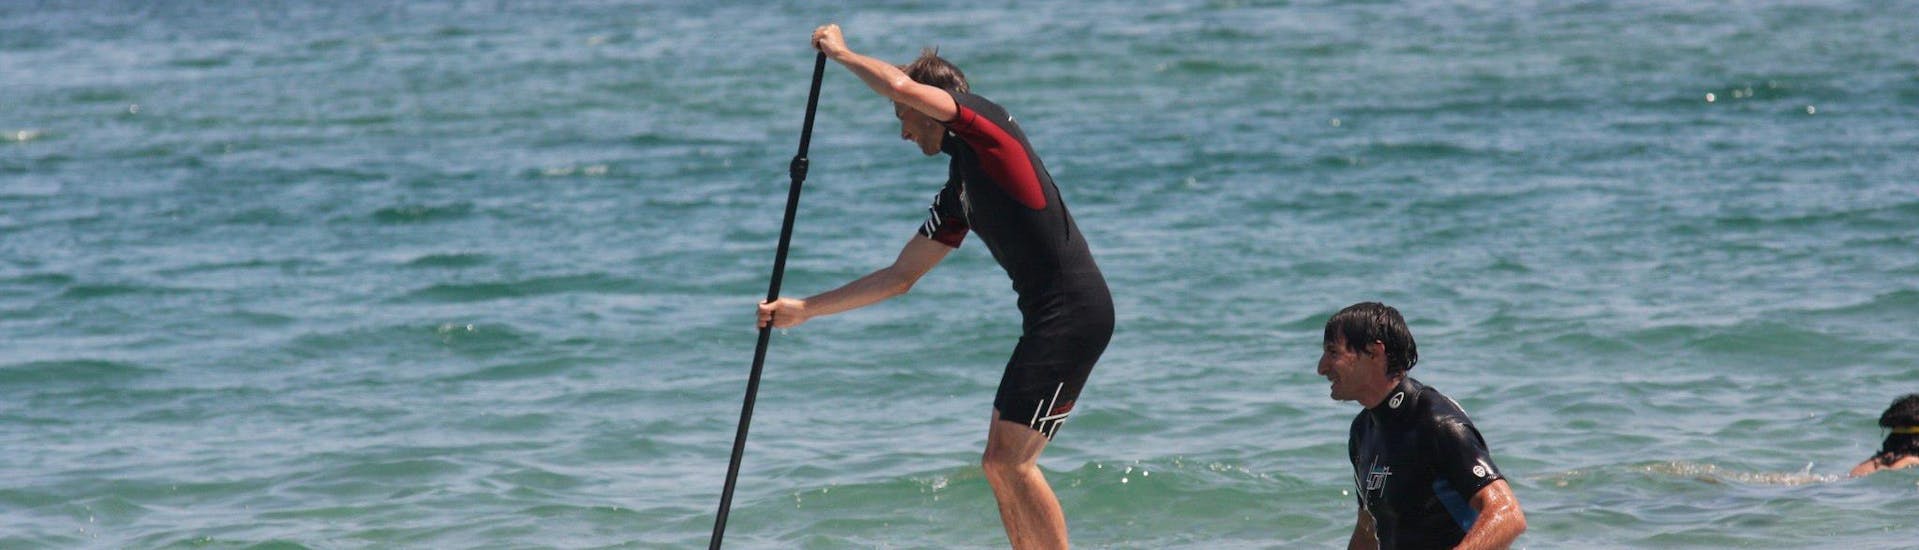 Stand Up Paddleboarding Lessons for Beginners with CBCM France - Hero image